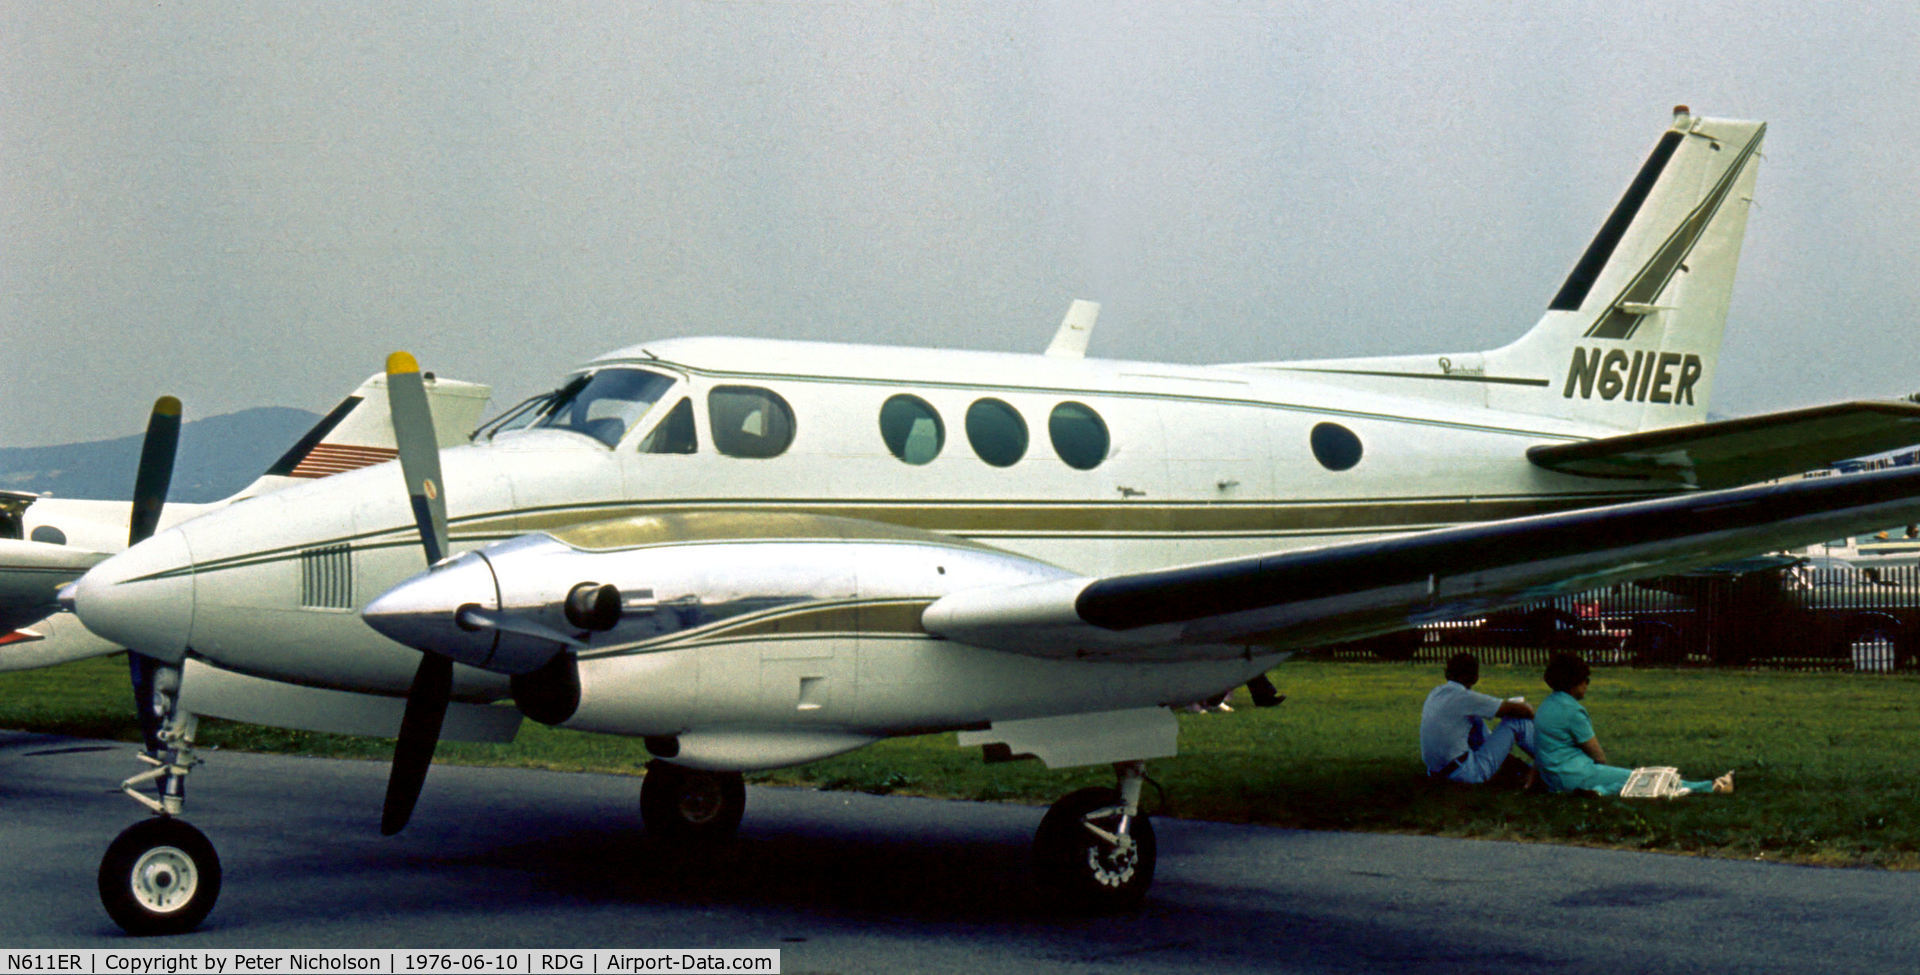 N611ER, 1968 Beech B90 C/N LJ-334, This King Air B90 was on display at the 1976 Reading Airshow.